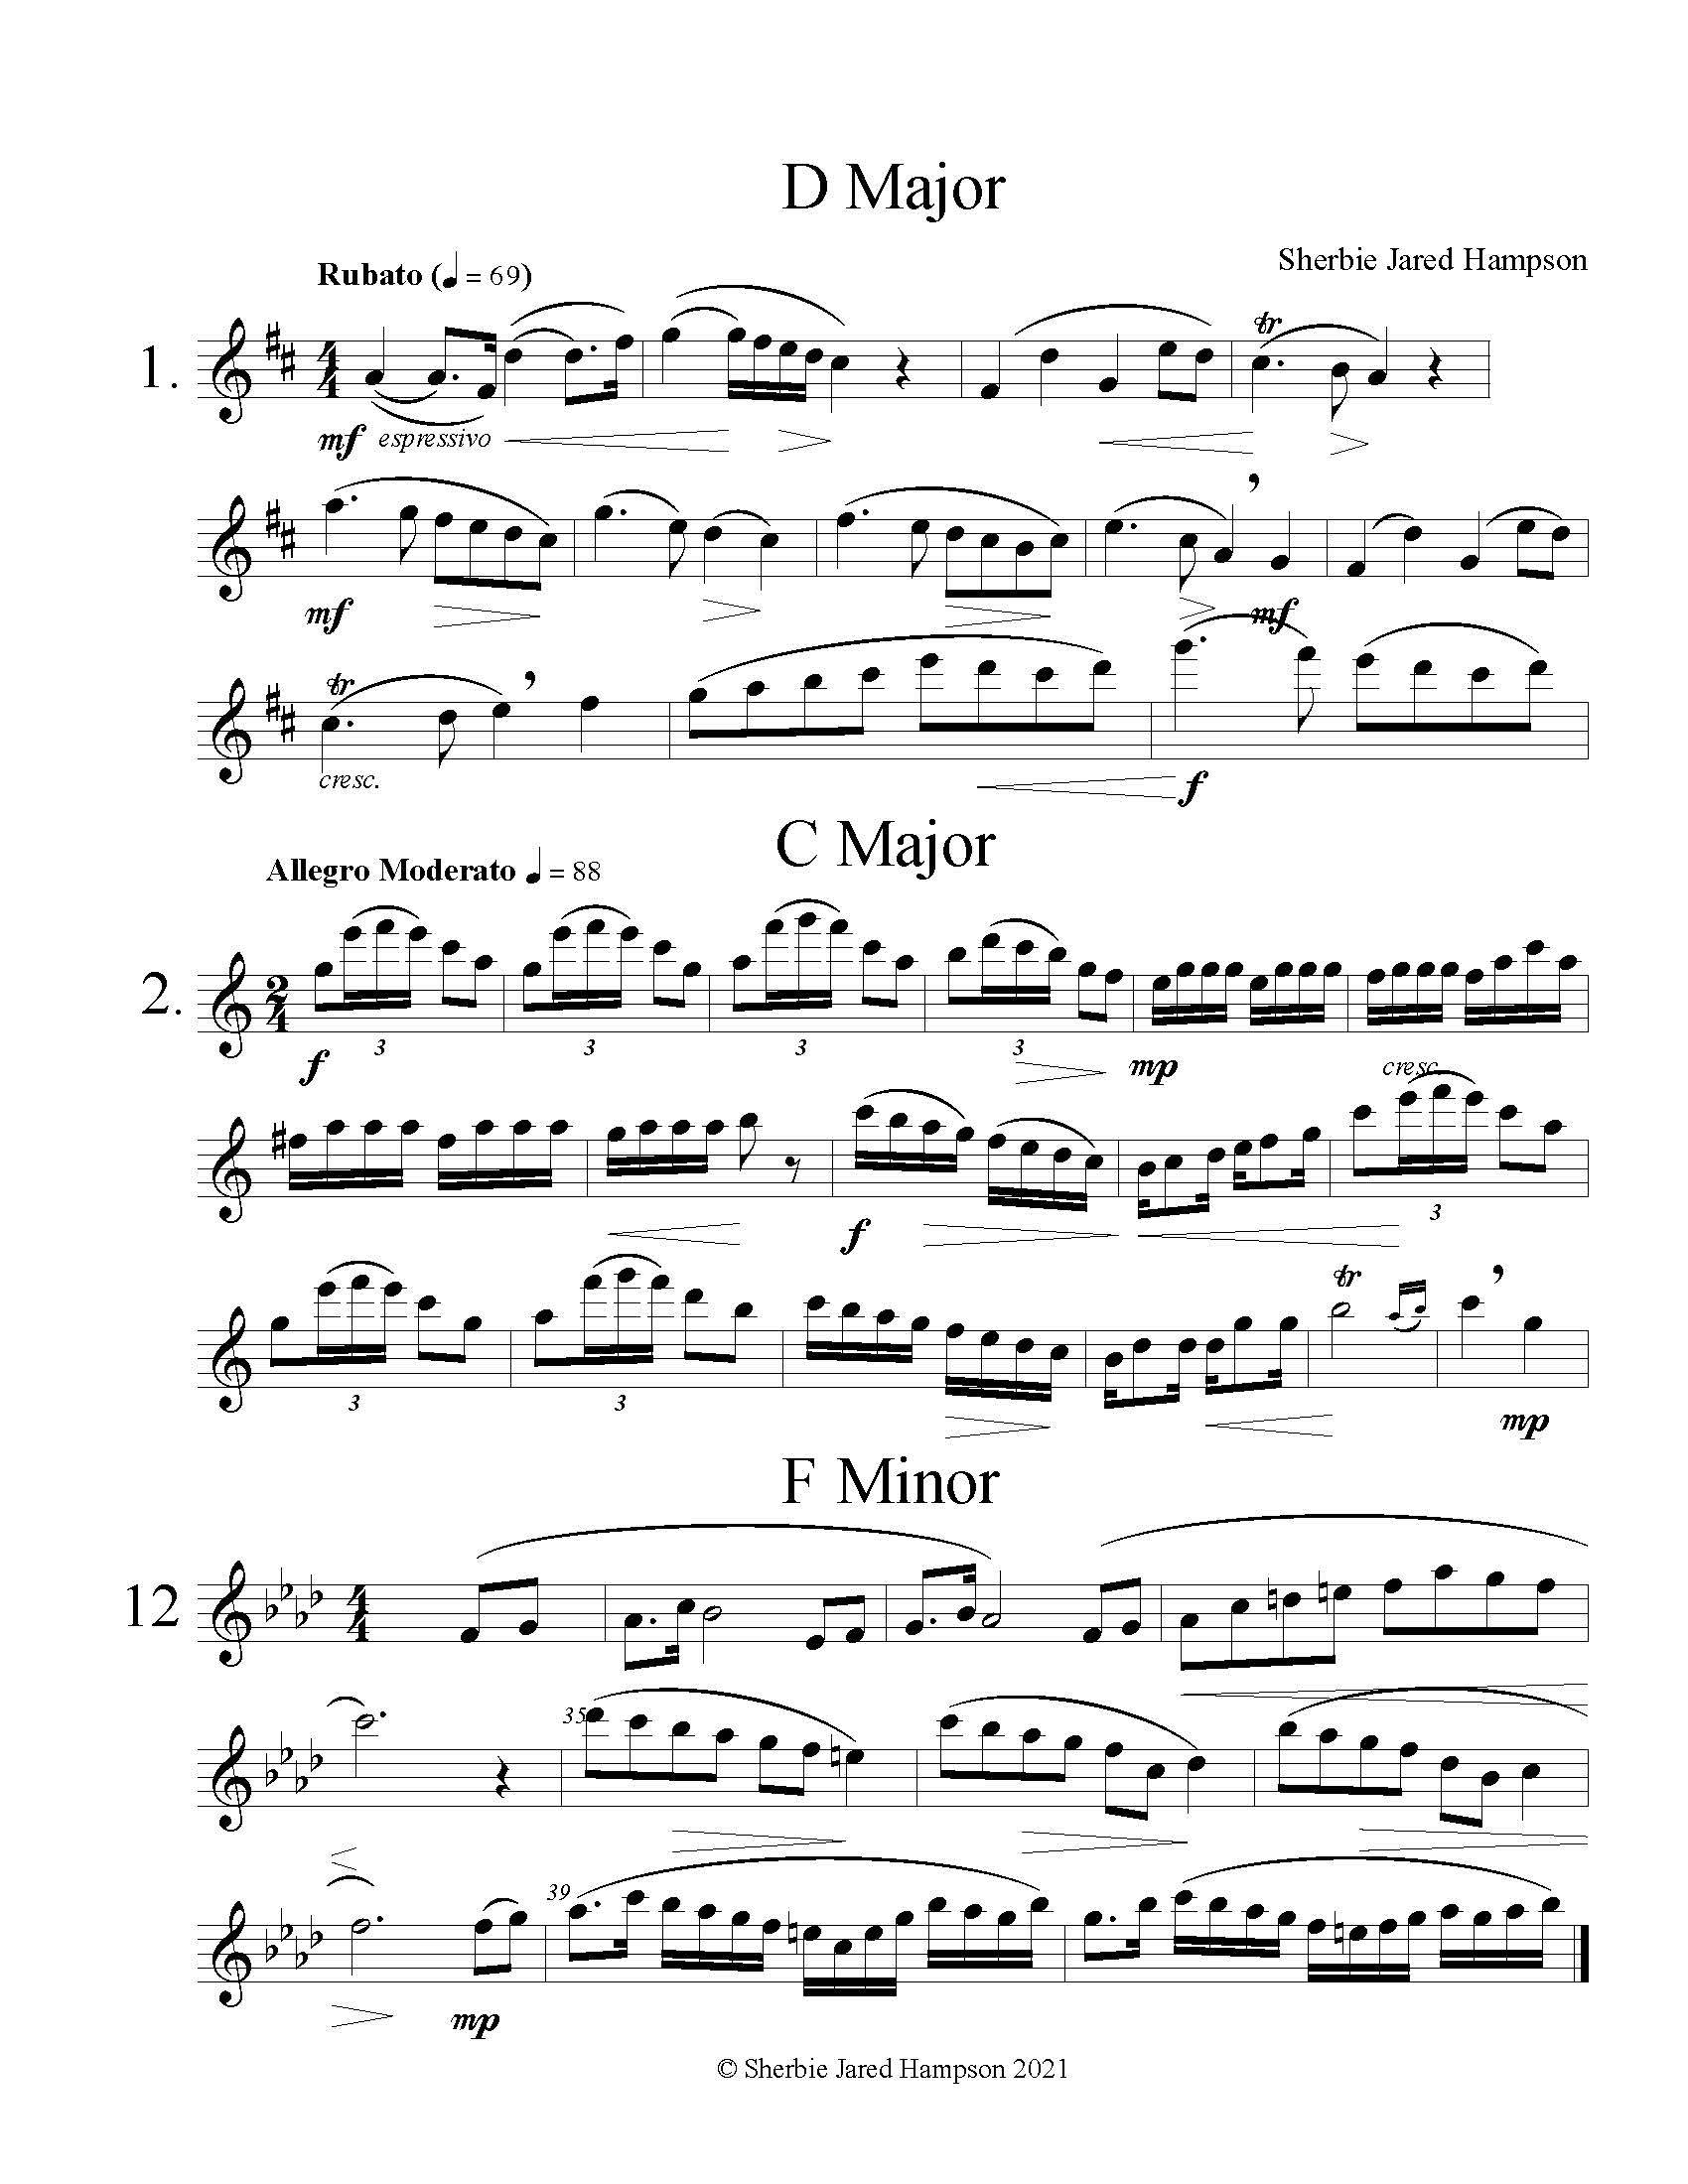 This page shows excerpts of three songs from Flutiful Etudes, Numbers 1, 2, and 12